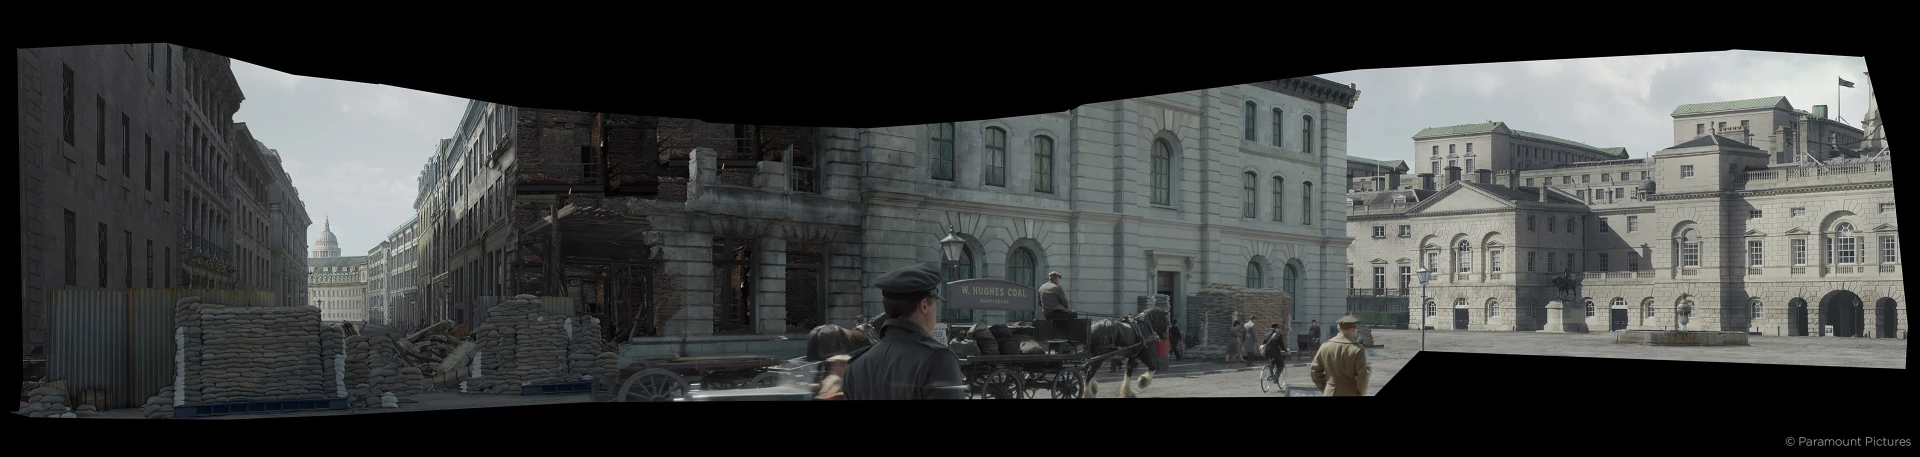 War view scene in city from Raynault vfx